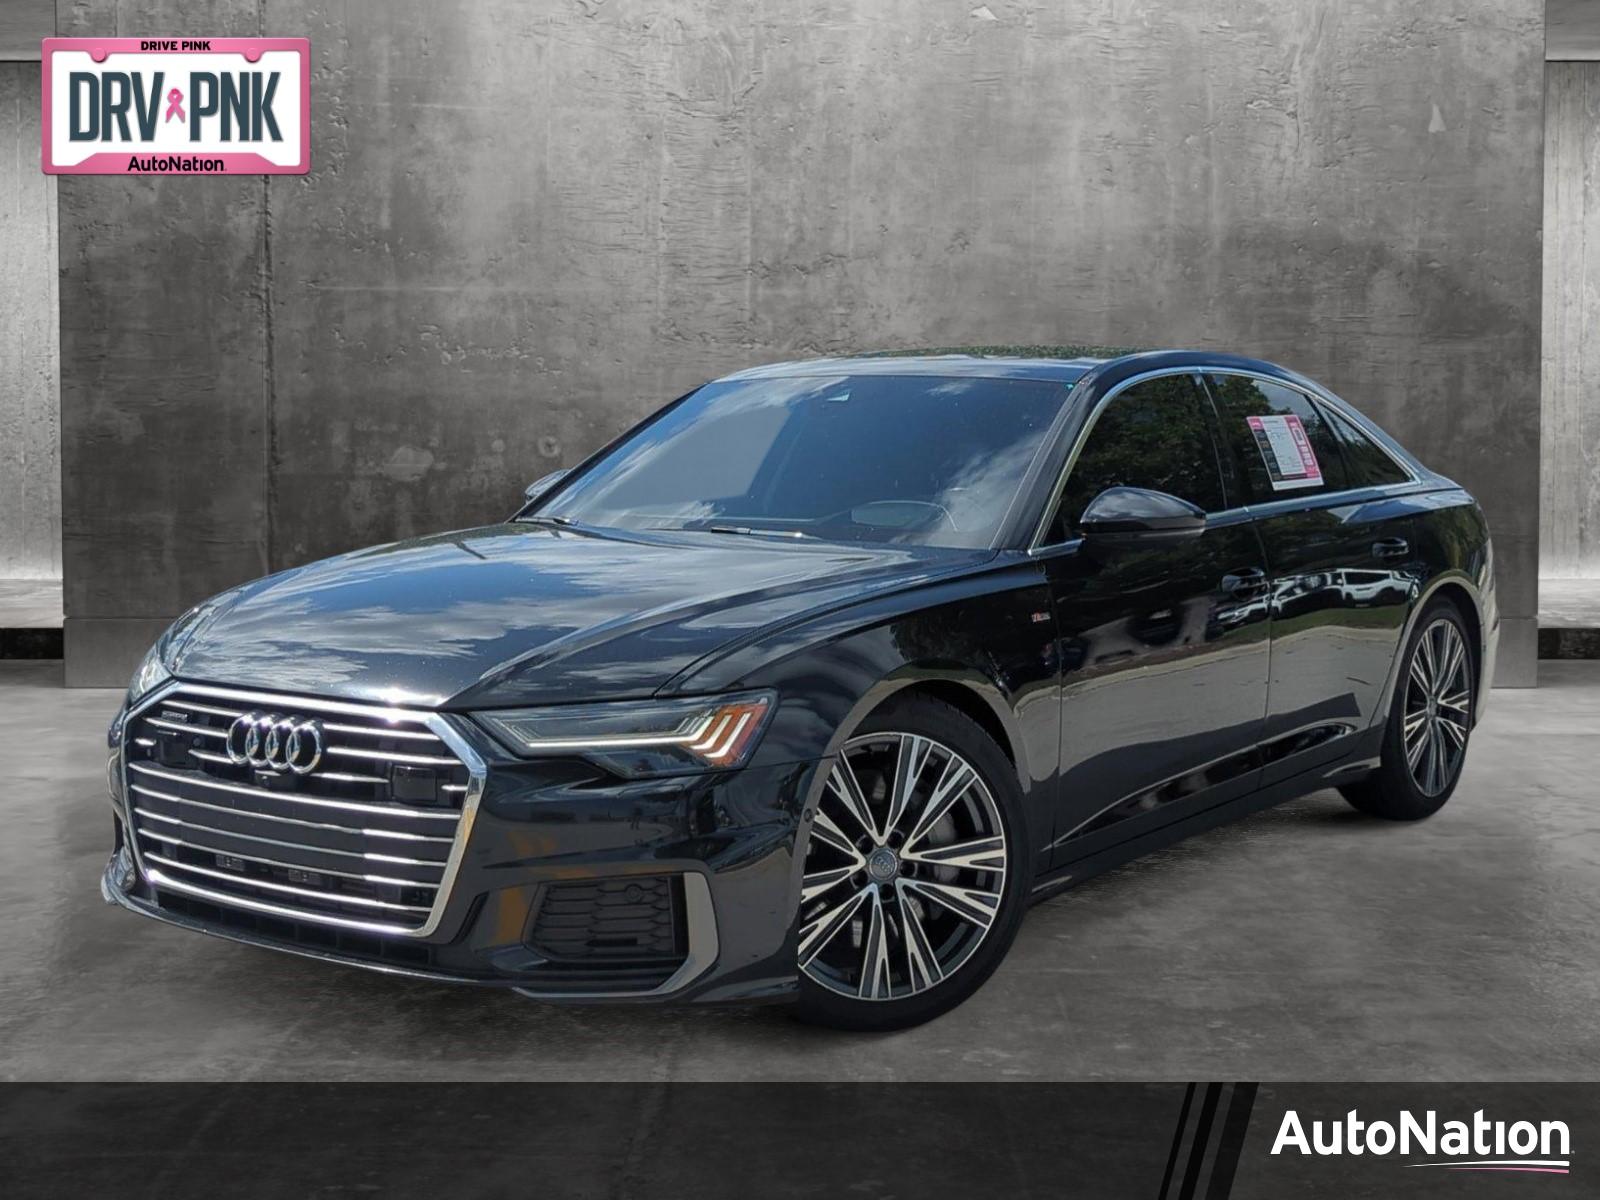 2019 Audi A6 Vehicle Photo in Hollywood, FL 33021